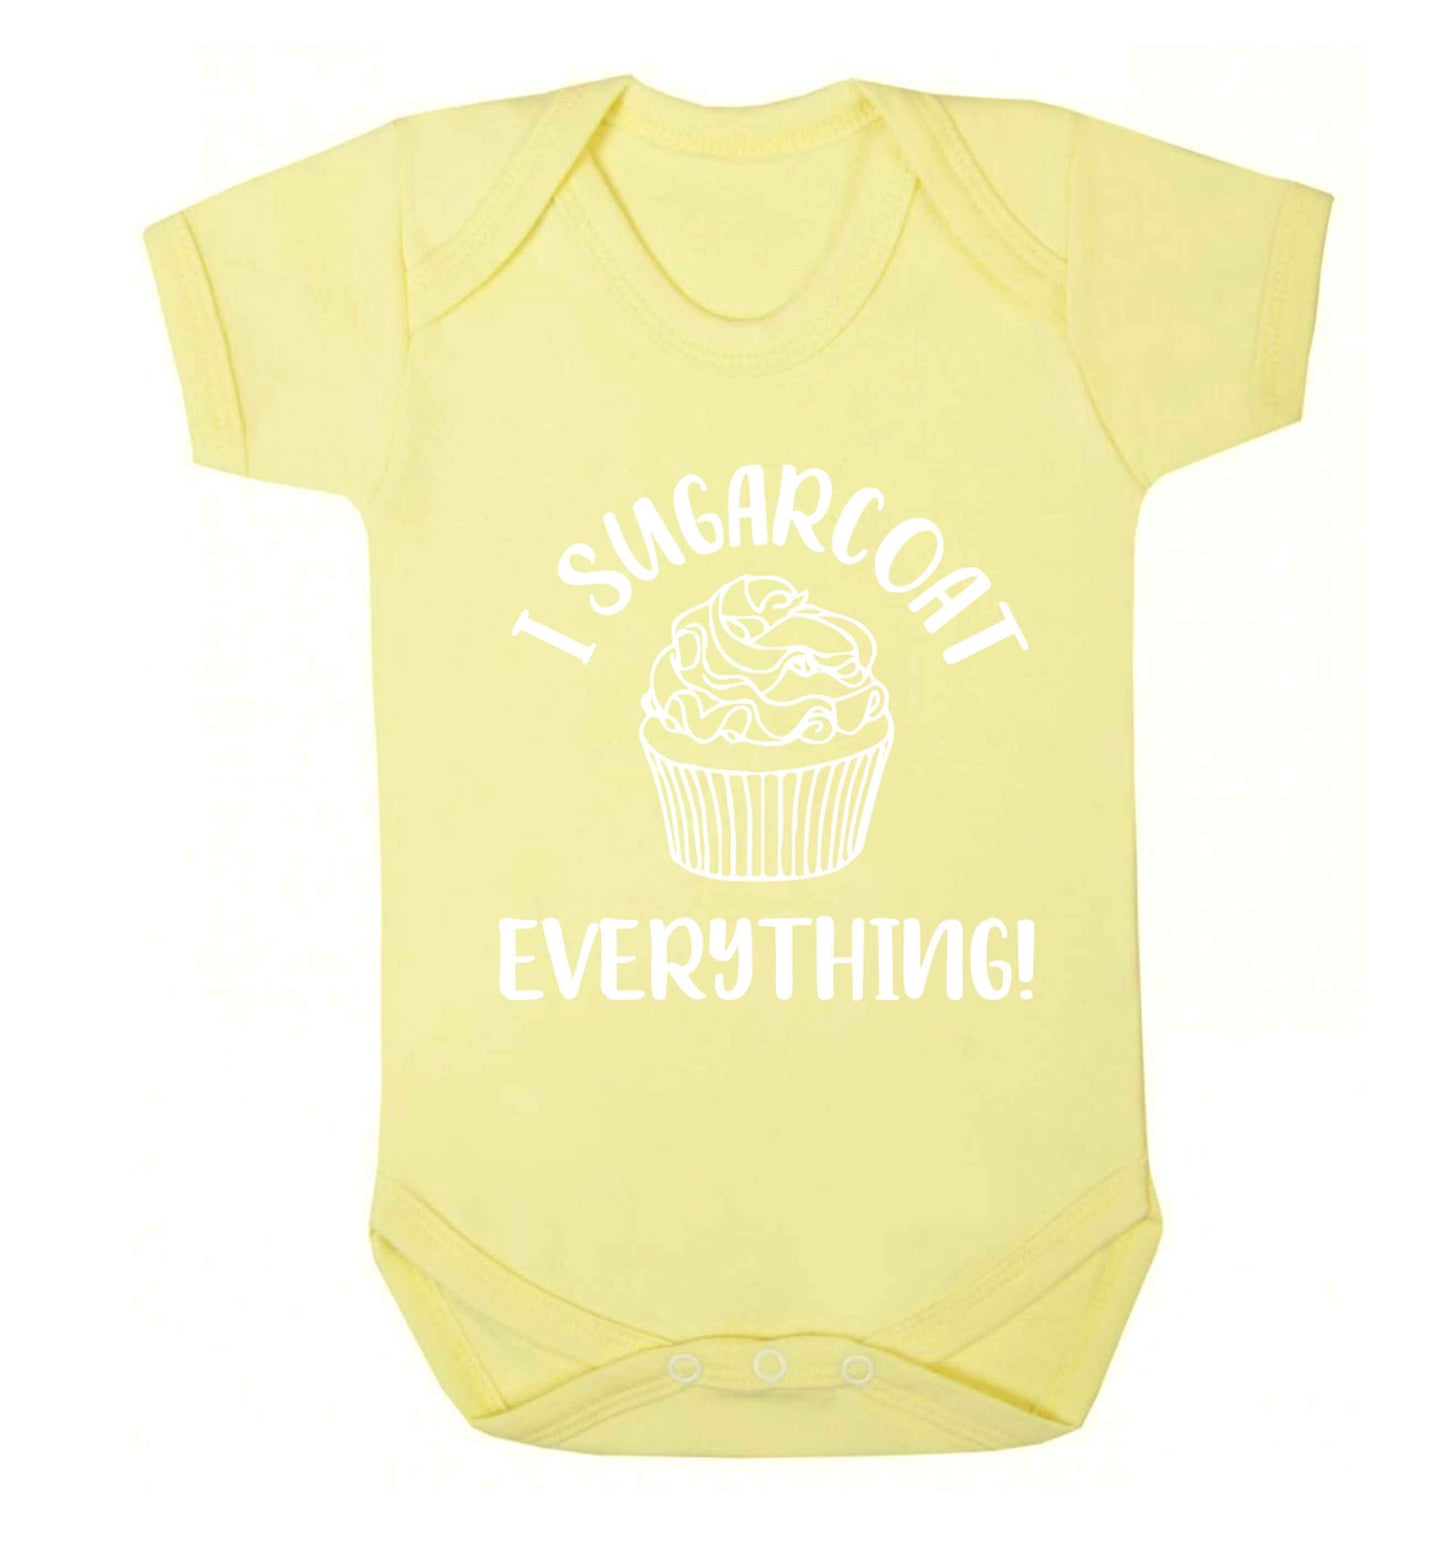 I sugarcoat everything Baby Vest pale yellow 18-24 months